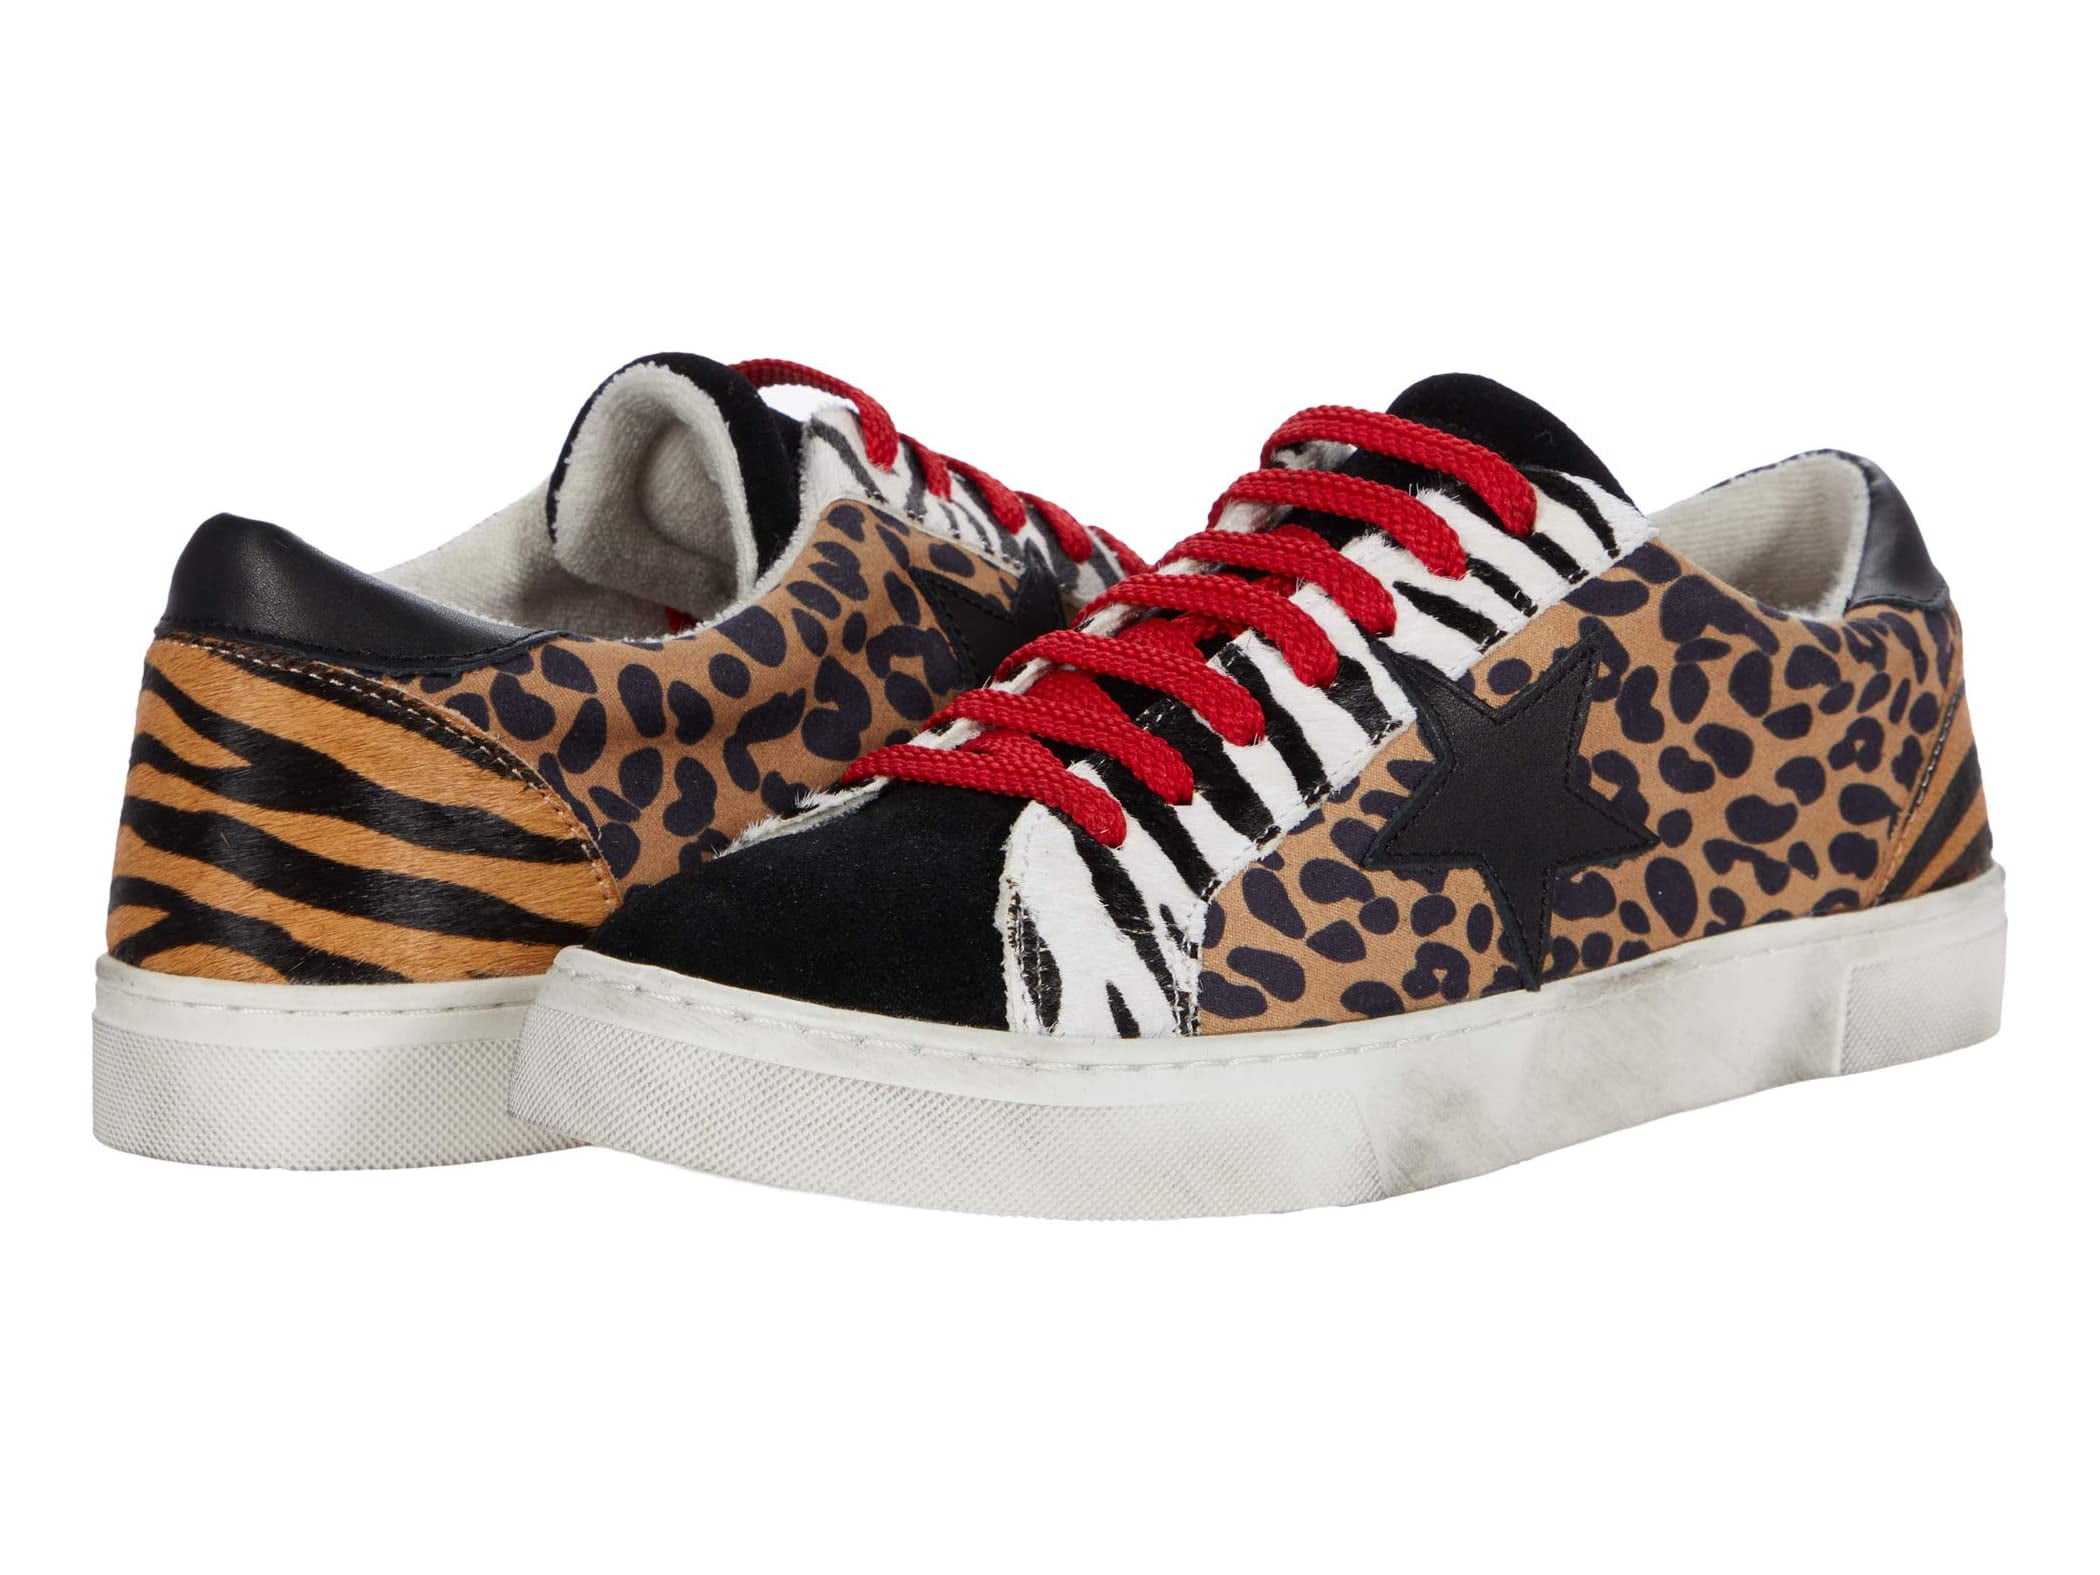 STEVEN BY Steve Madden Rubie Low Top Star Shoes Red Lace up Sneaker Leopard  (, ANIMAL) 